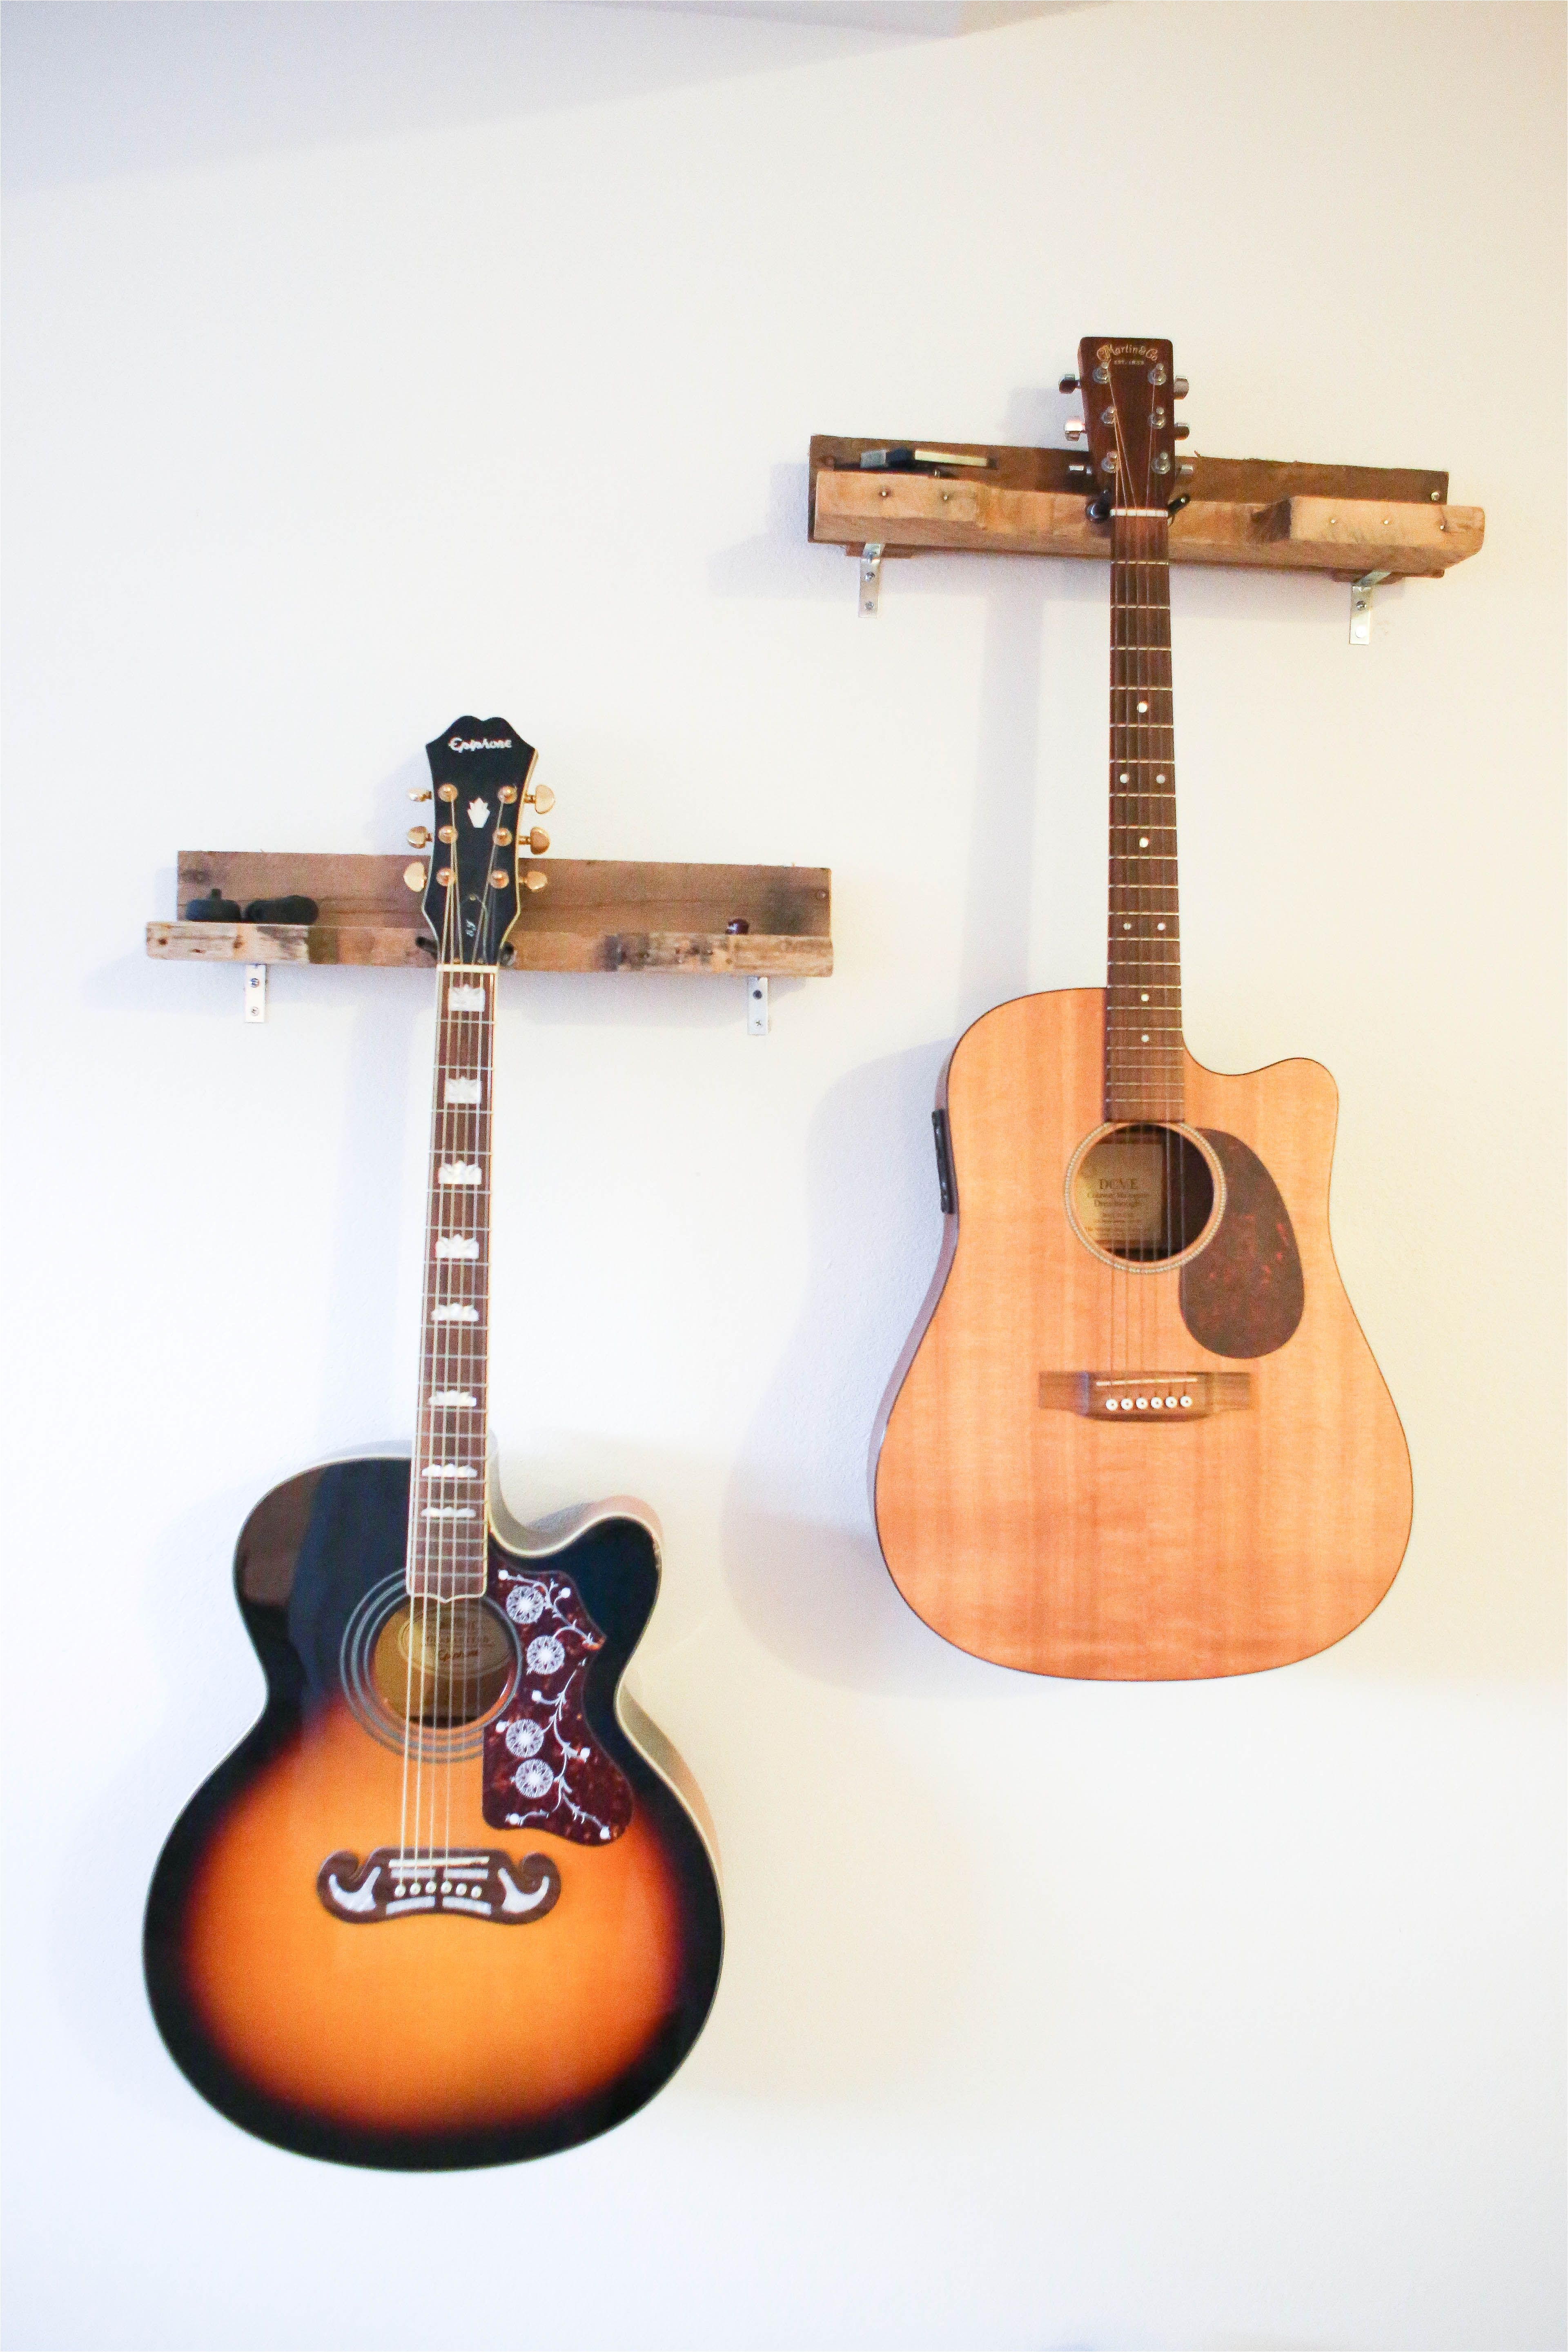 lovely handcrafted solid wood guitar rack made primarily out of old pallets the wood has been washed and sanded for heath and safety purposes